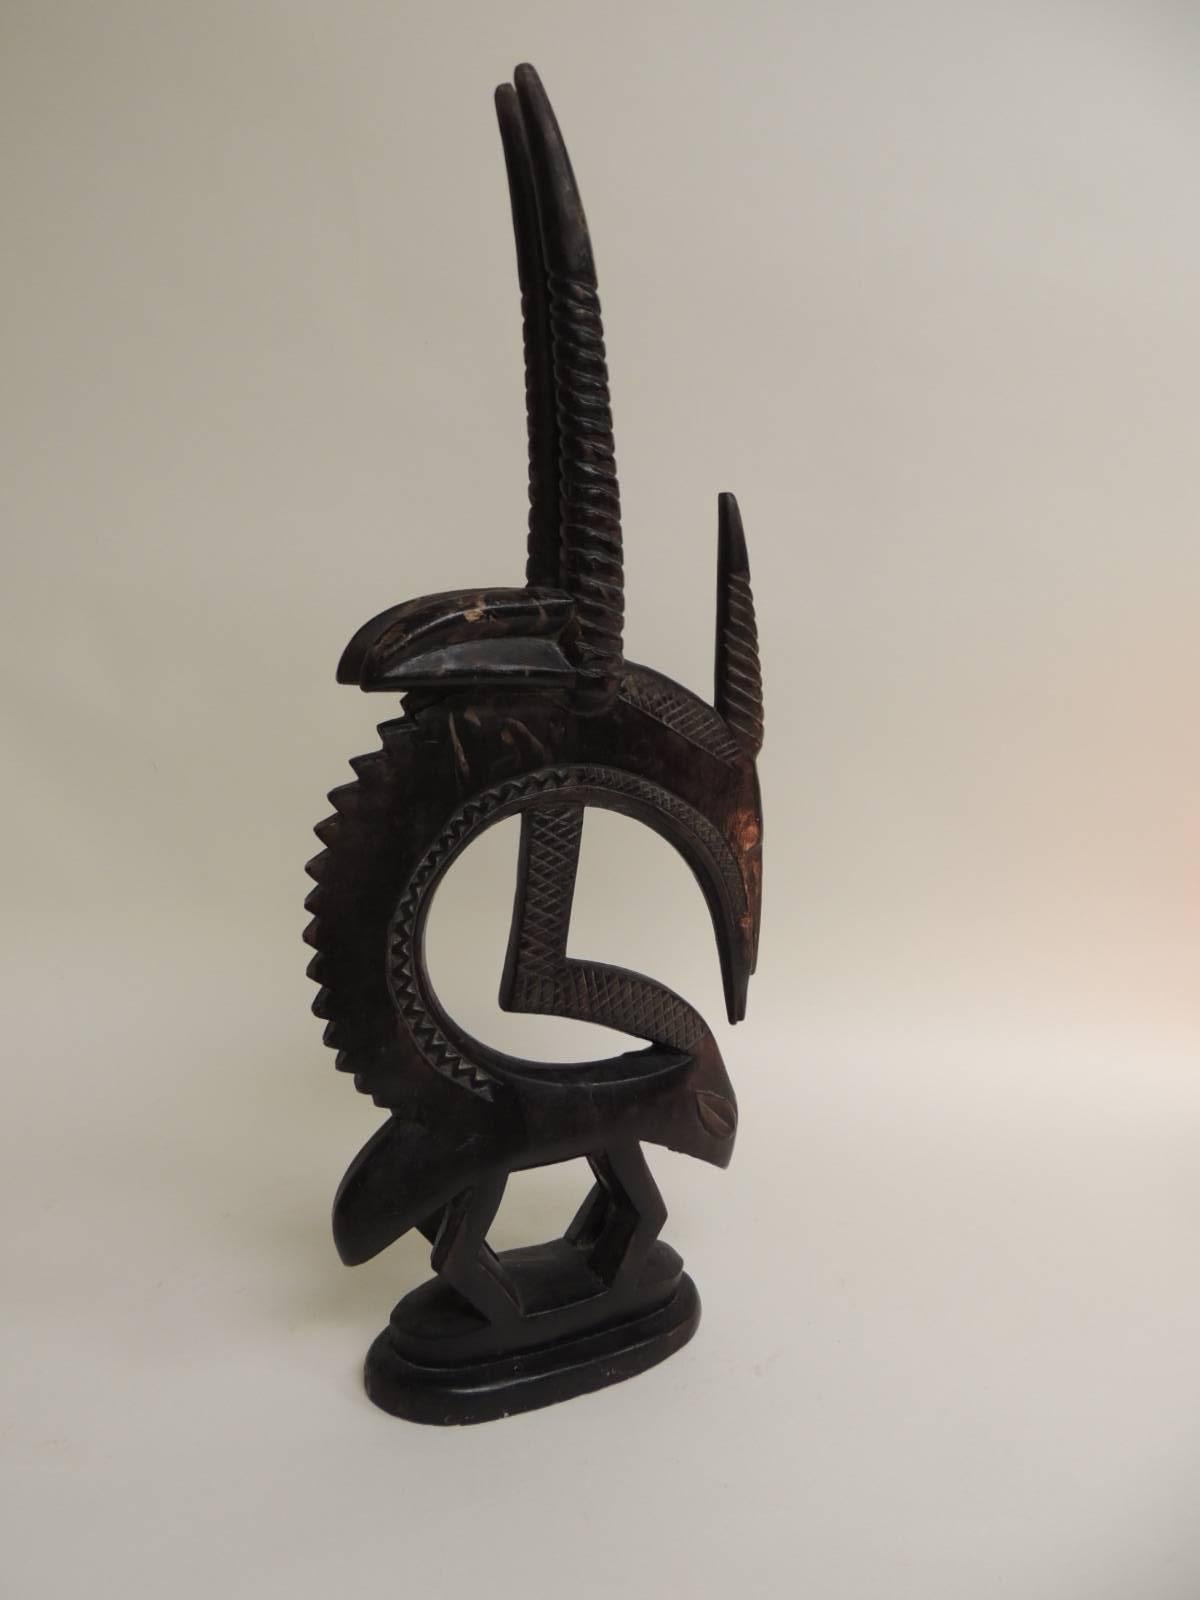 Bamana Antelope Chi Wara Head-crest African sculpture in terracotta
Primitive Art.
This tall sculptural antelope is a rare (heavy) composition piece. Solid forged iron cover with terracotta and finished in a bronze patina. Signed: Austin